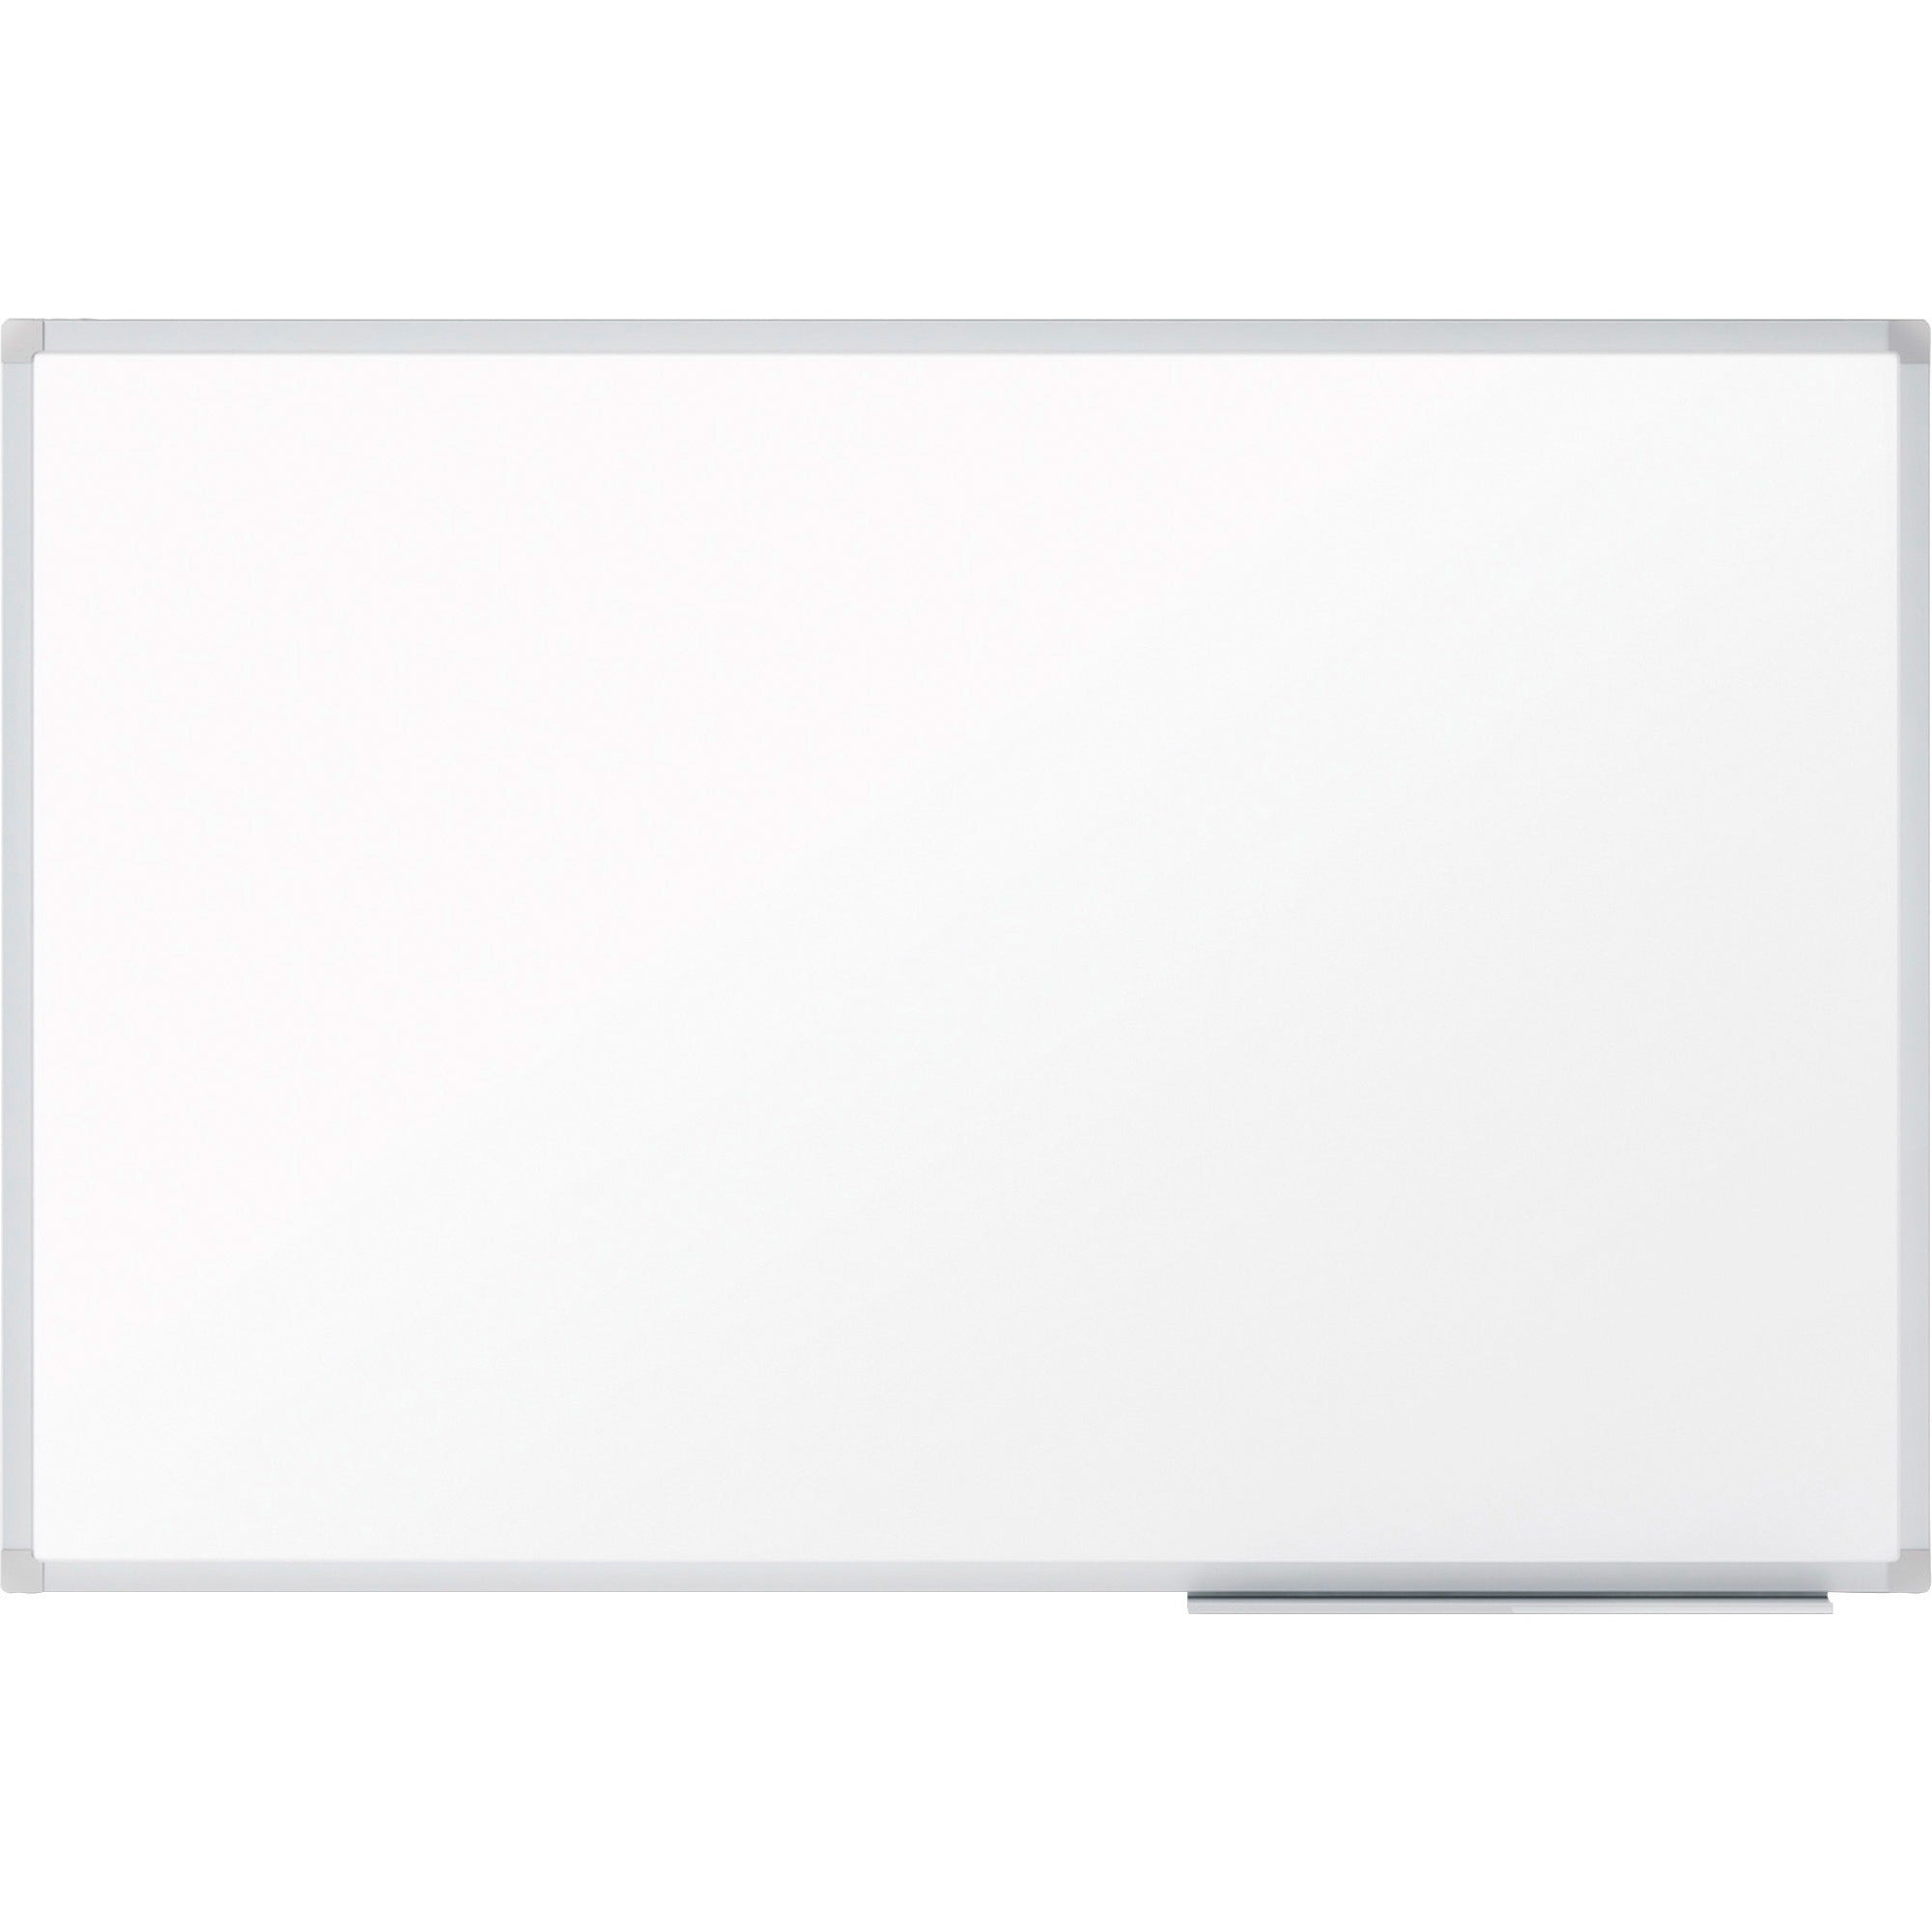 Mead Basic Dry-Erase Board - 48" (4 ft) Width x 36" (3 ft) Height - White Melamine Surface - Silver Aluminum Frame - Durable - 1 Each - 1